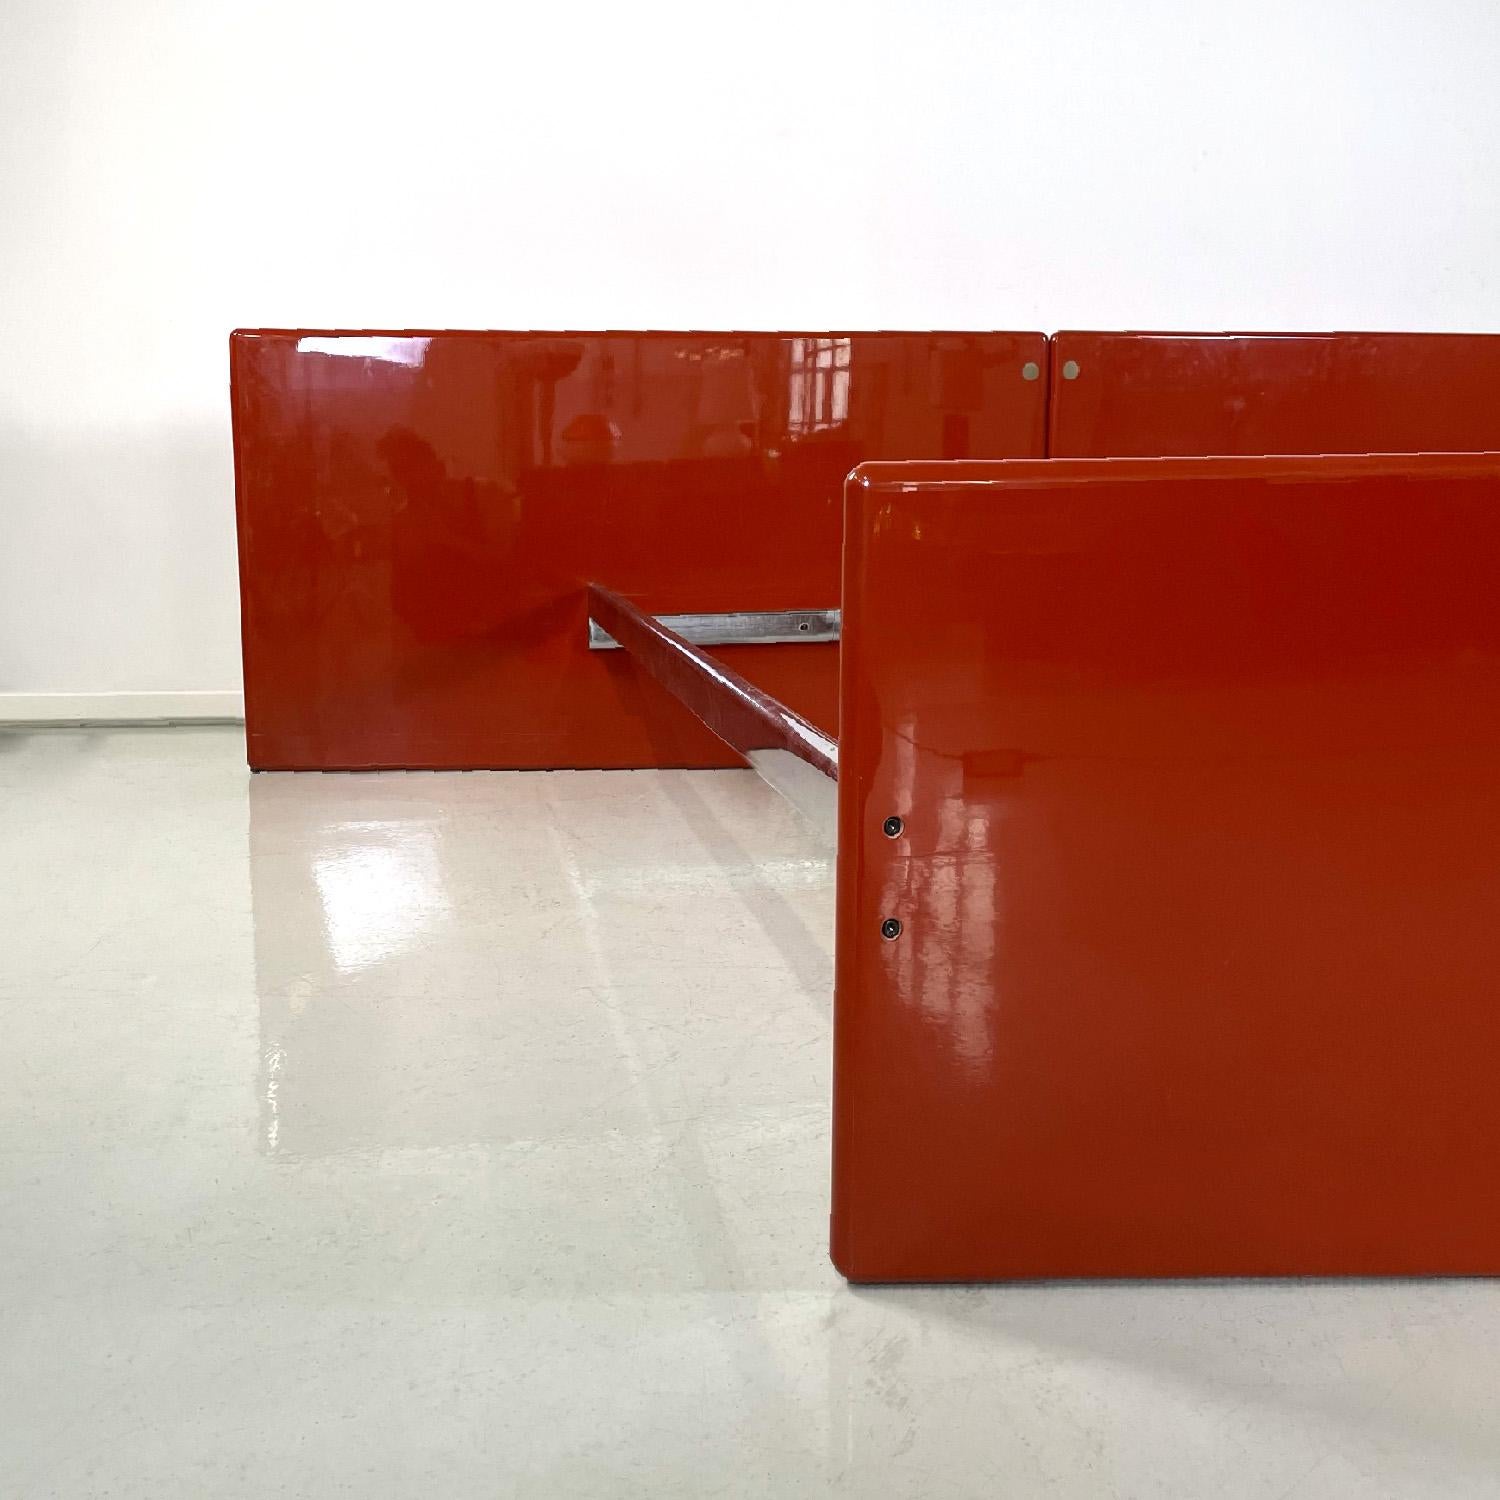 Modern Italian modern red lacquered wood metal bed by Takahama for Simon Gavina, 1970s For Sale